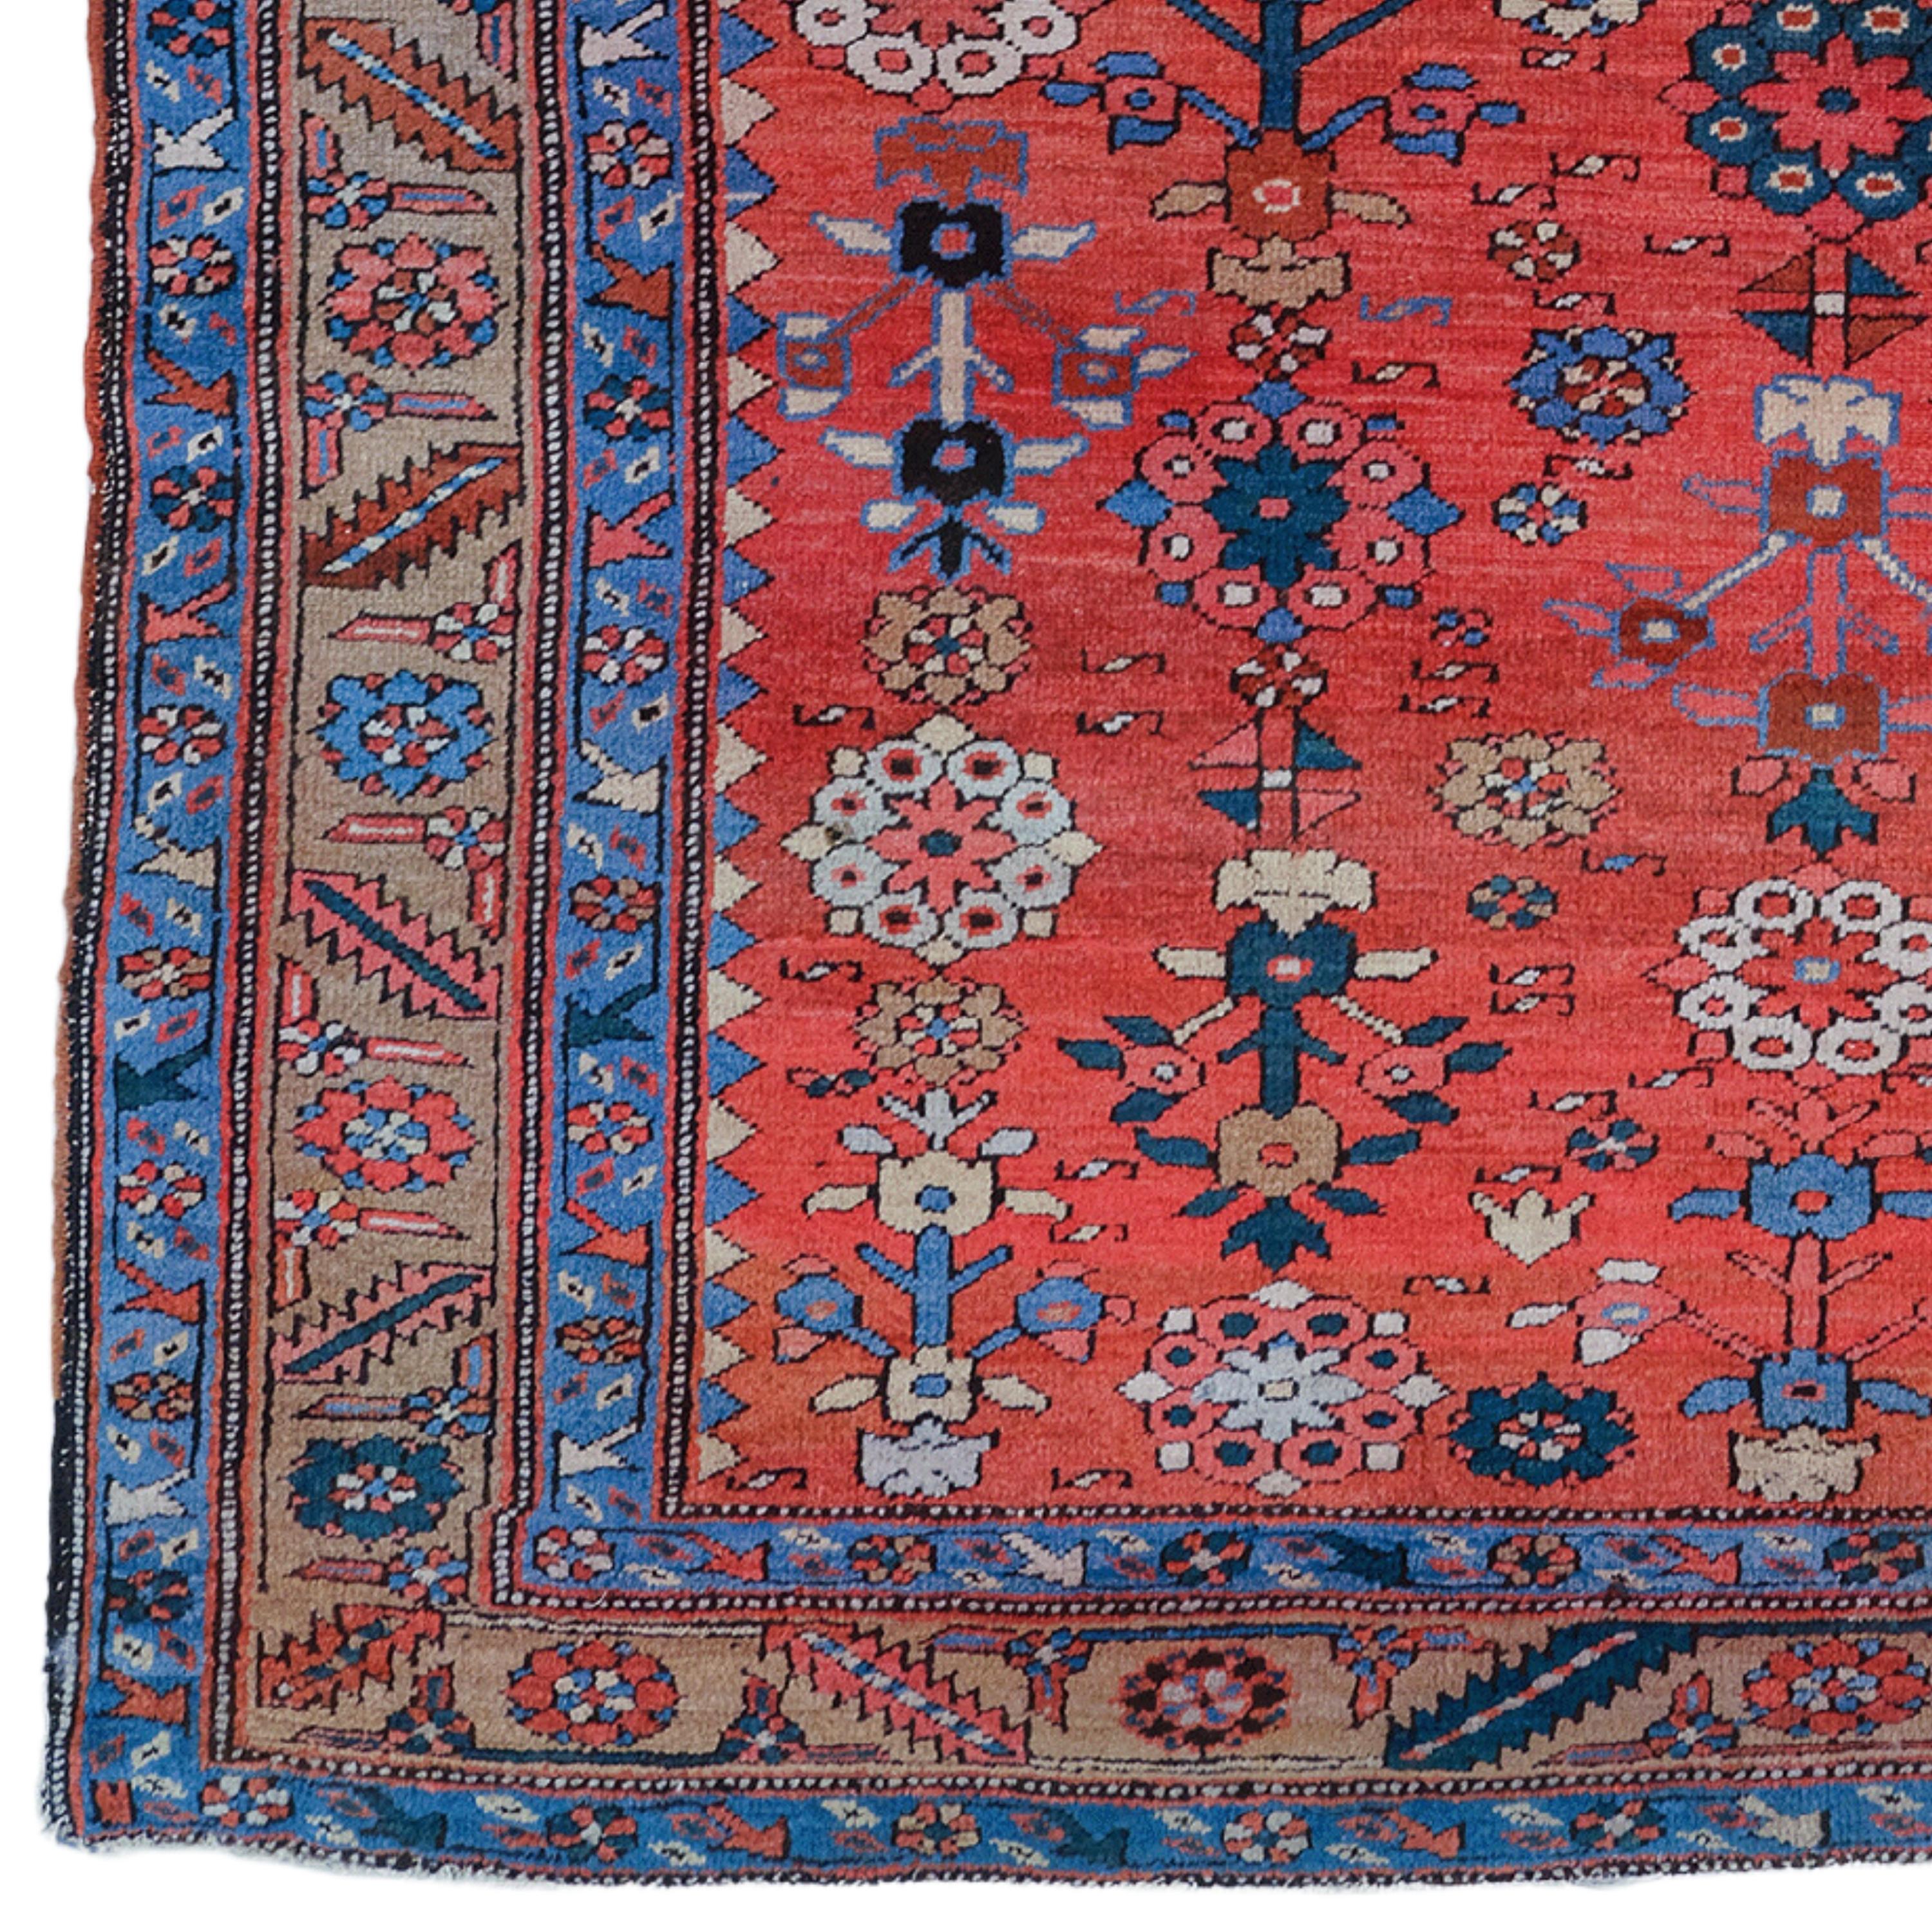 This exquisite antique Bakhsaish carpet is a masterpiece that displays the artistic richness and mastery of handcraftsmanship of the 19th century. This work, carefully woven with wool material, reflects the cultural diversity of its period. This